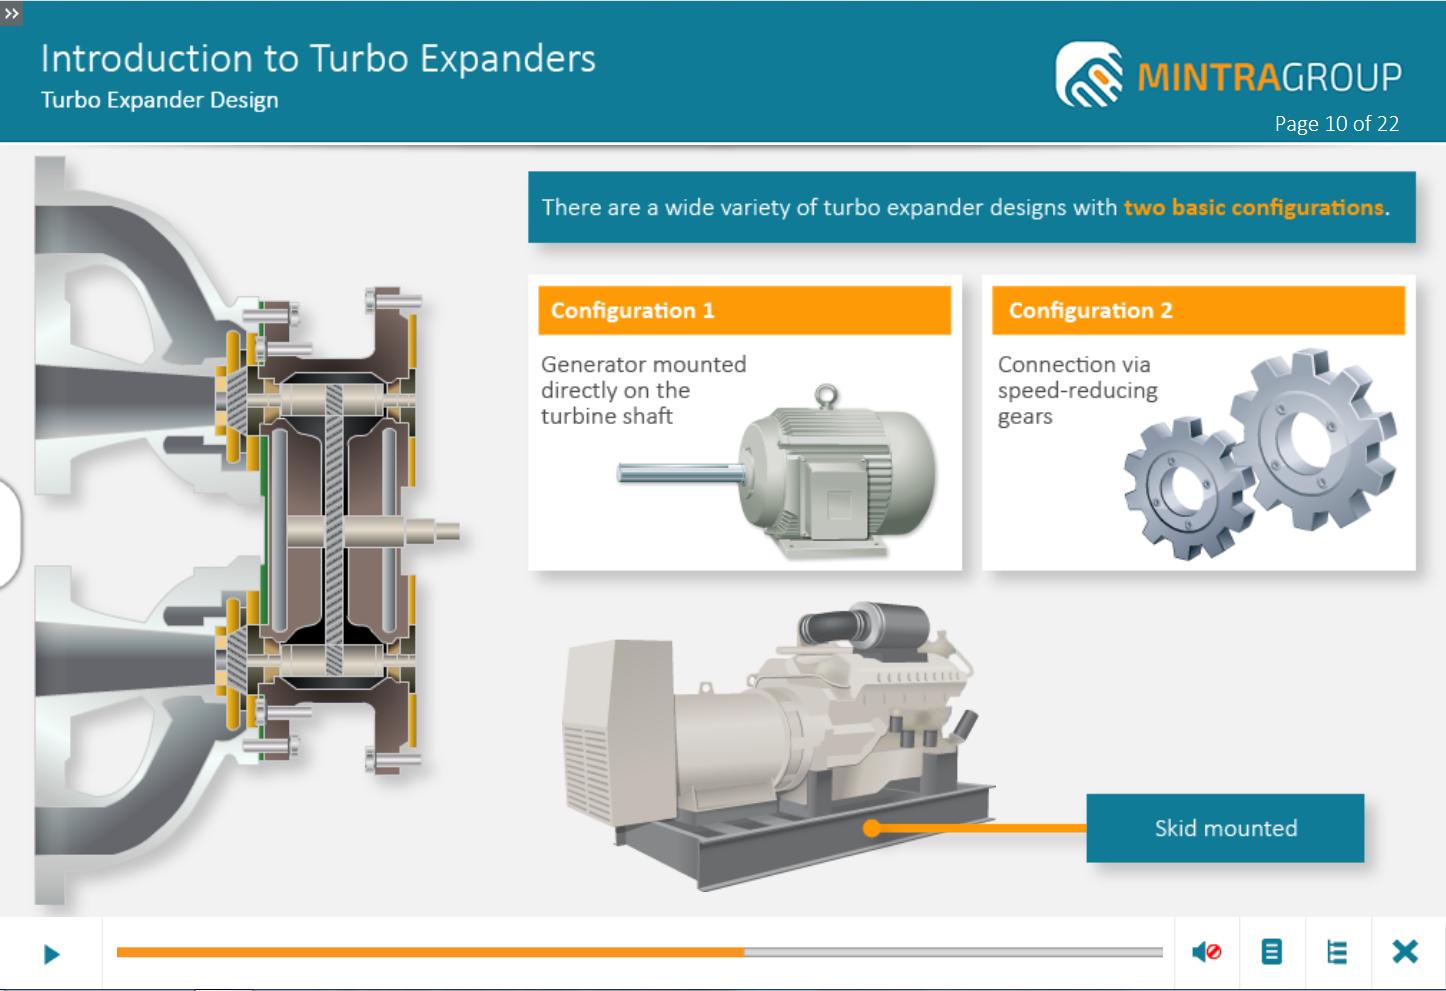 Introduction to Turbo Expanders Training